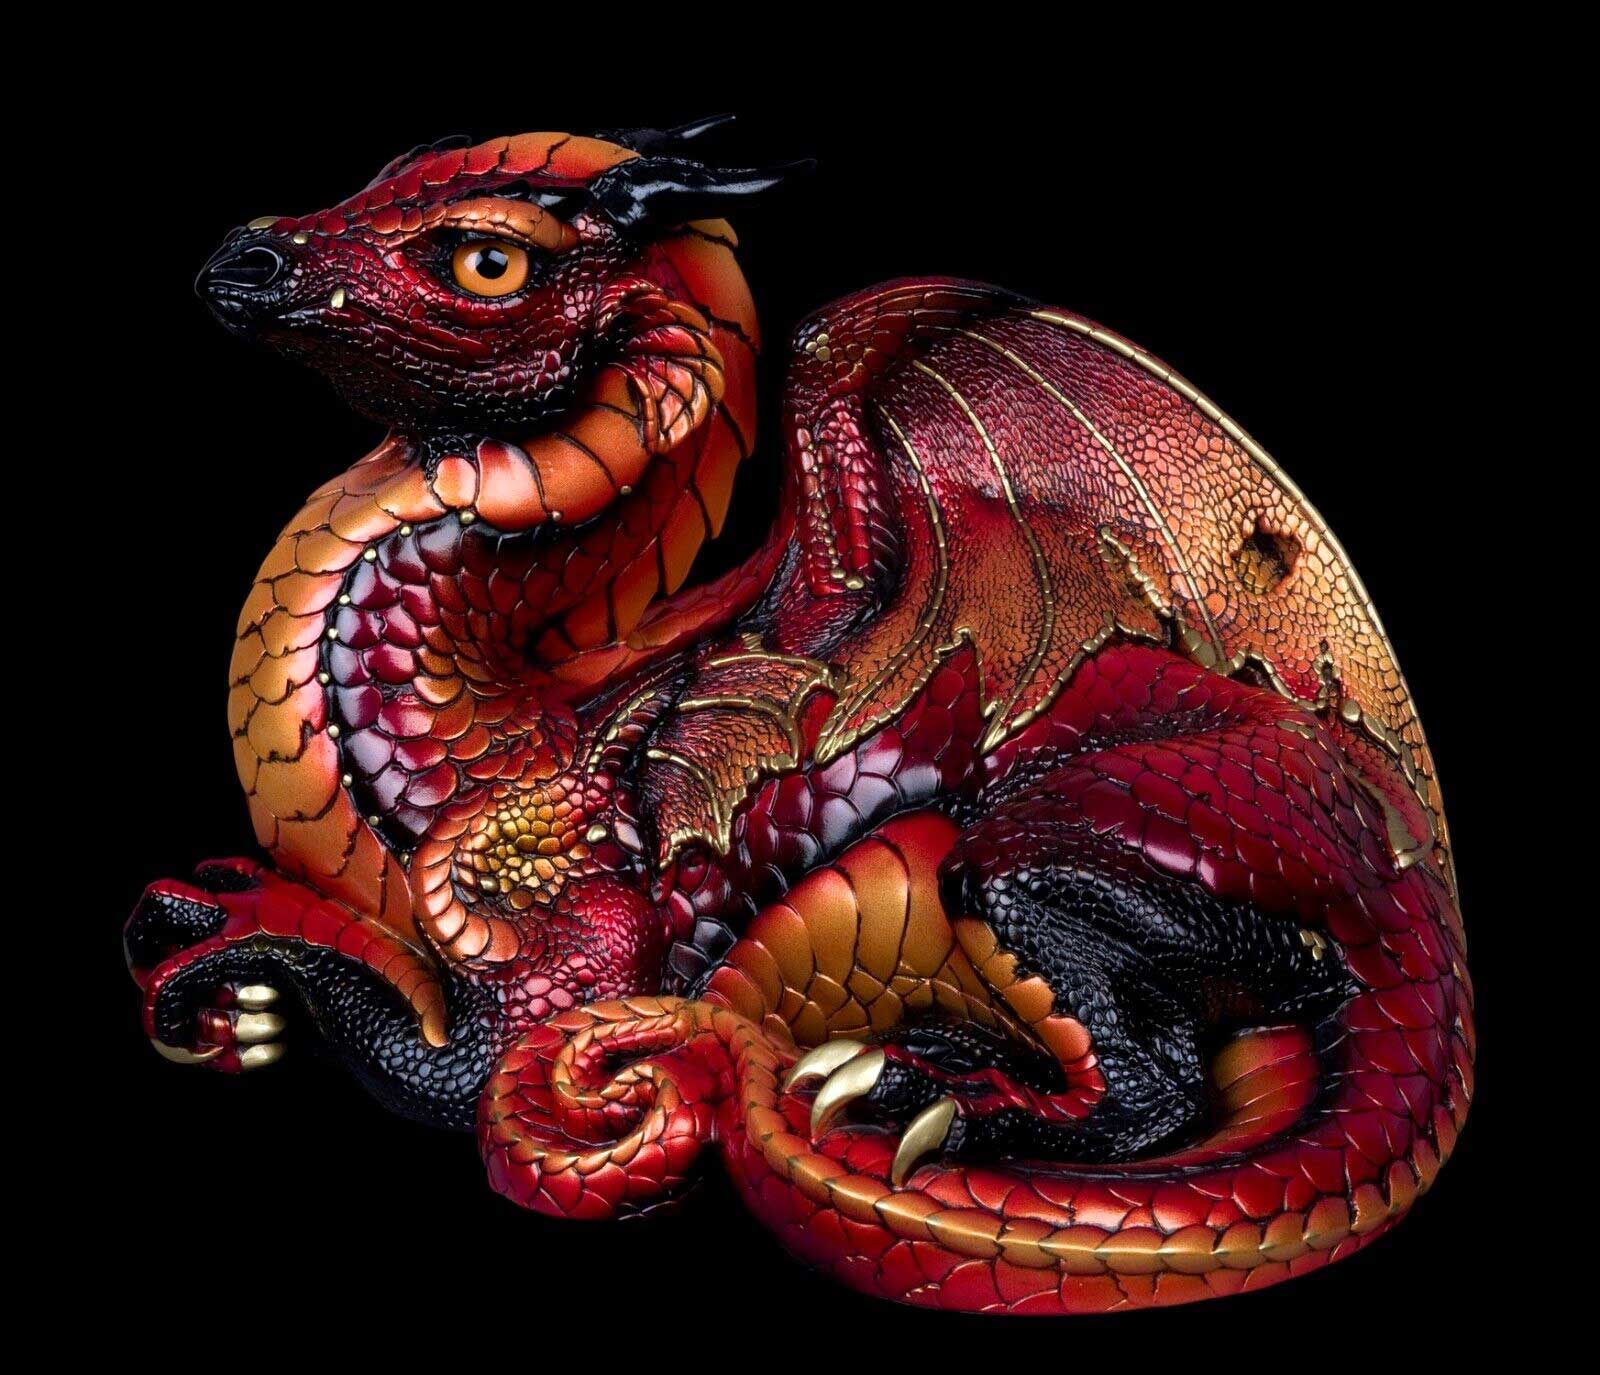 20230326-Brimstone-Old-Warrior-Dragon-Test-Paint-1-by-Gina